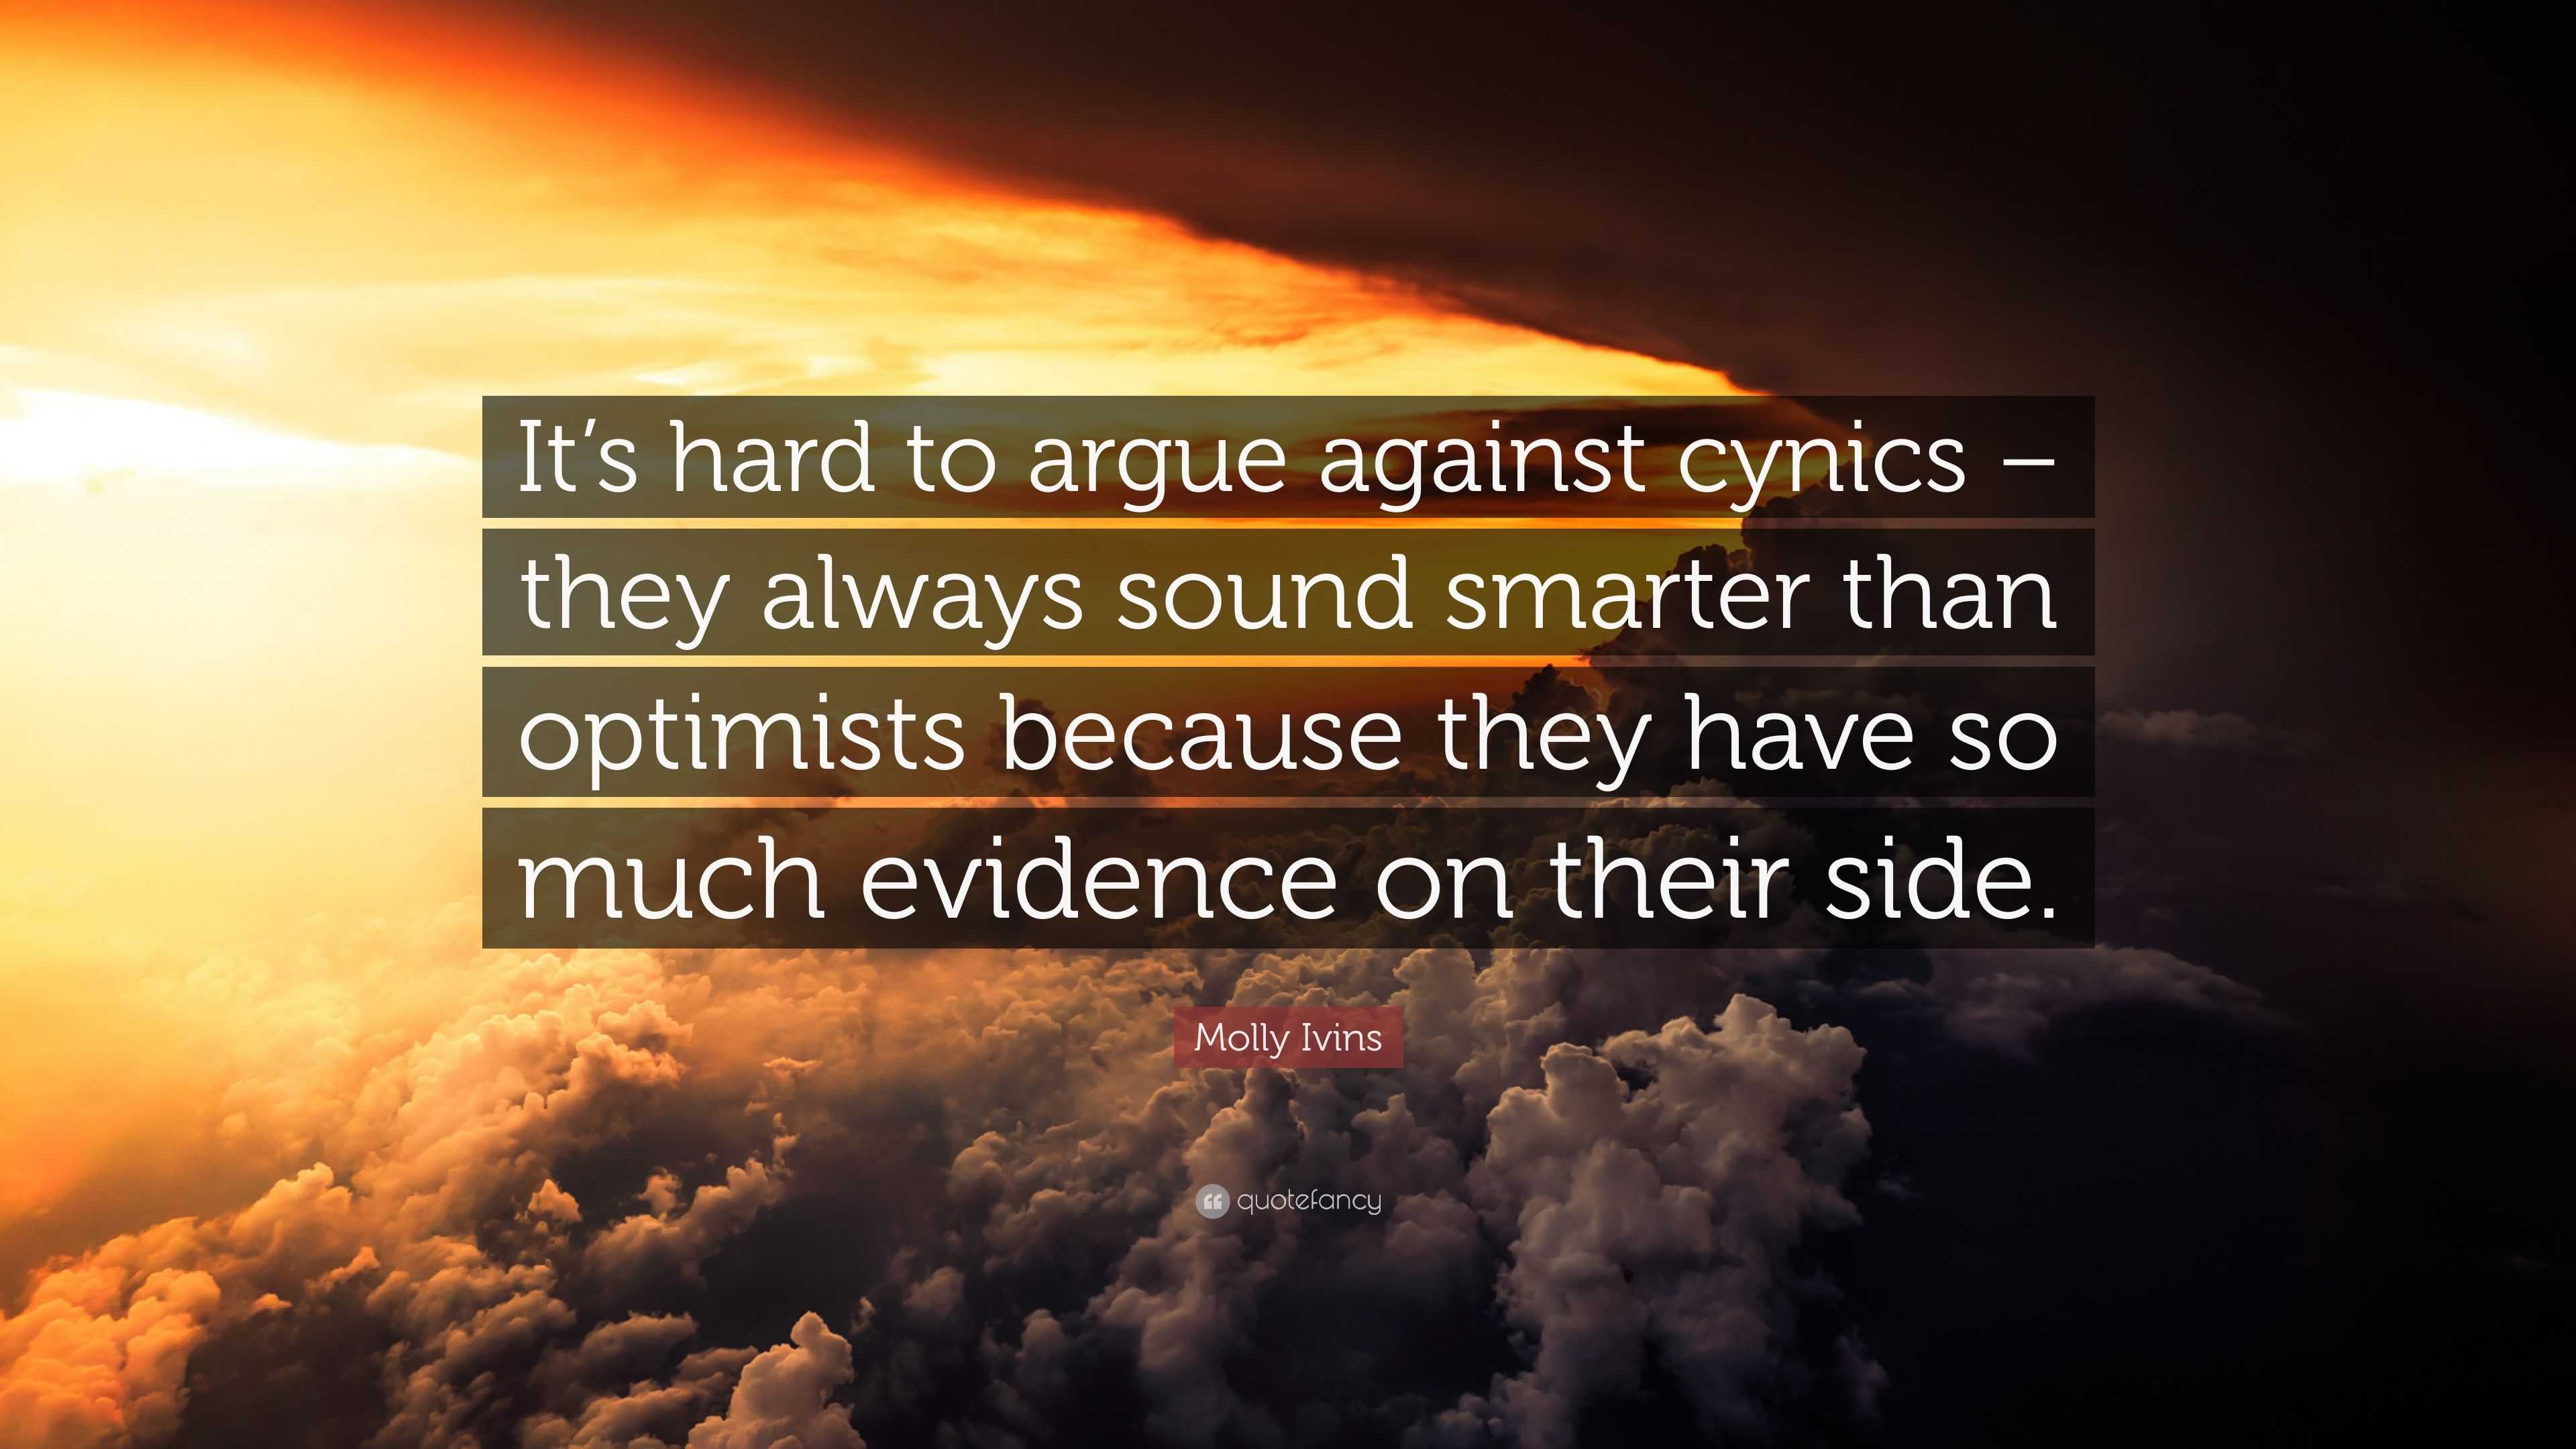 Molly Ivins Quote: “It’s hard to argue against cynics – they always ...